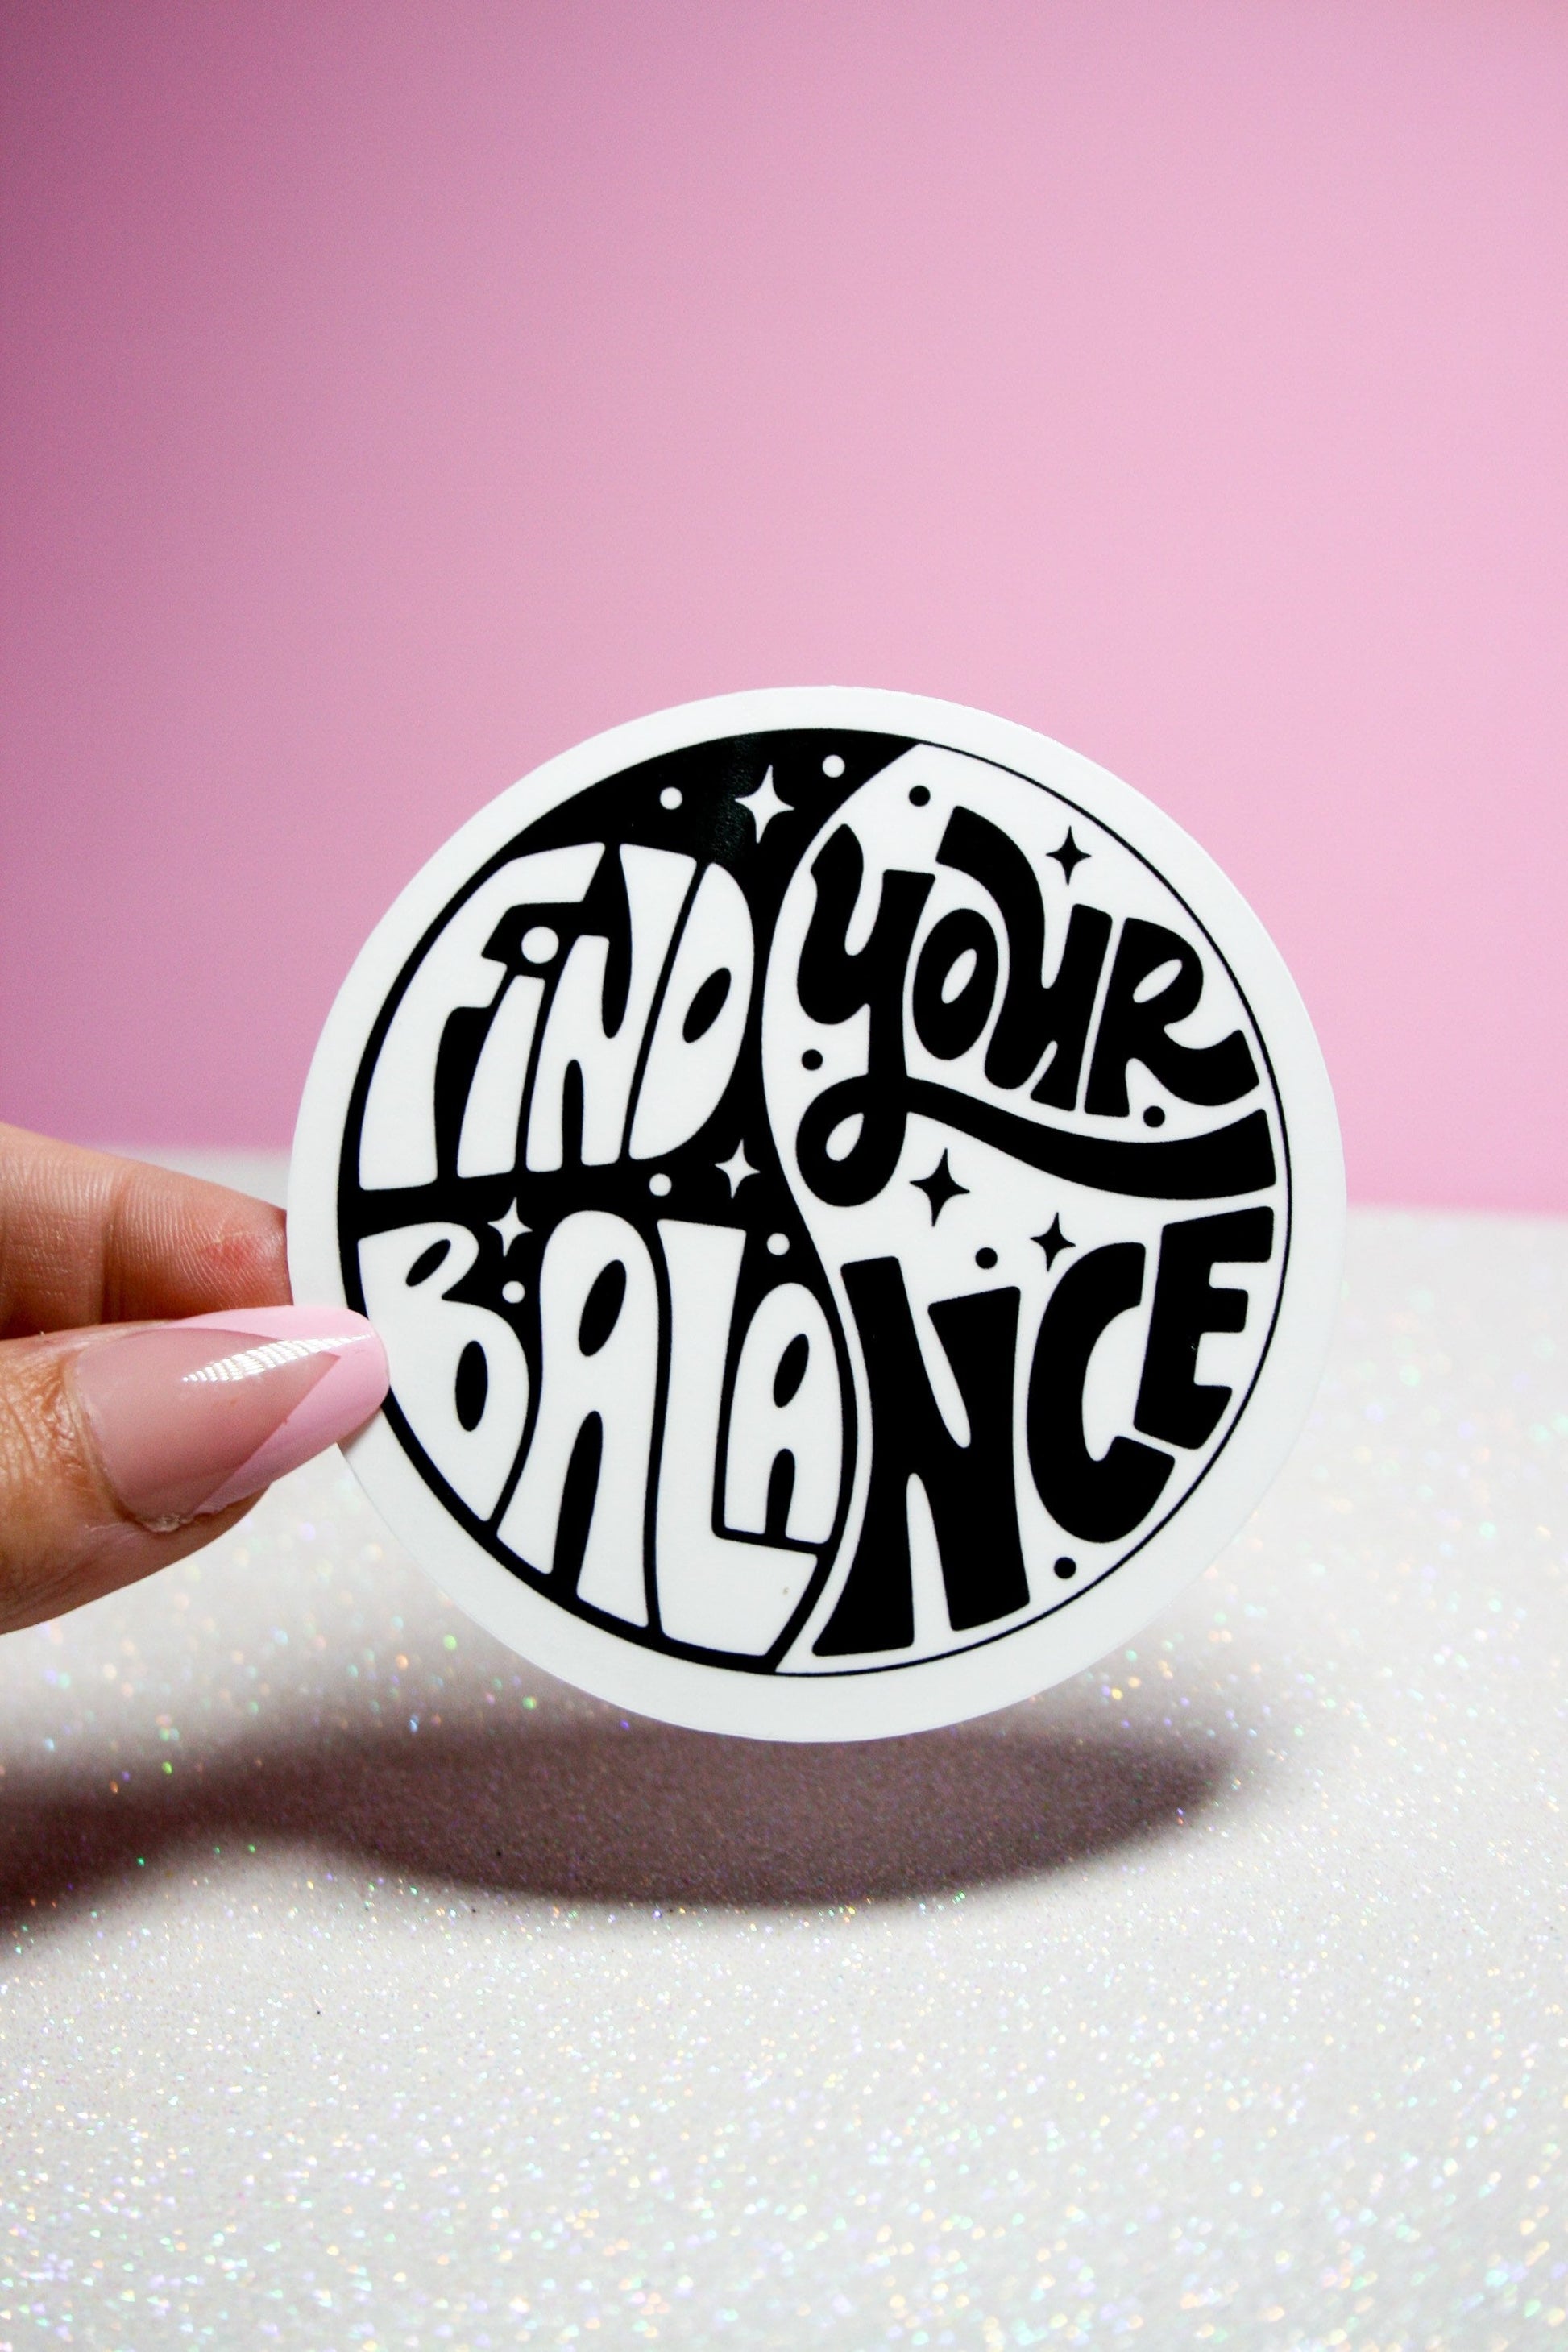 Find Your Balance Waterproof Sticker - Kindness Matters - Therapist Stickers - Gifts for Her - Positivity Decals - Be Positive, Yin and Yang